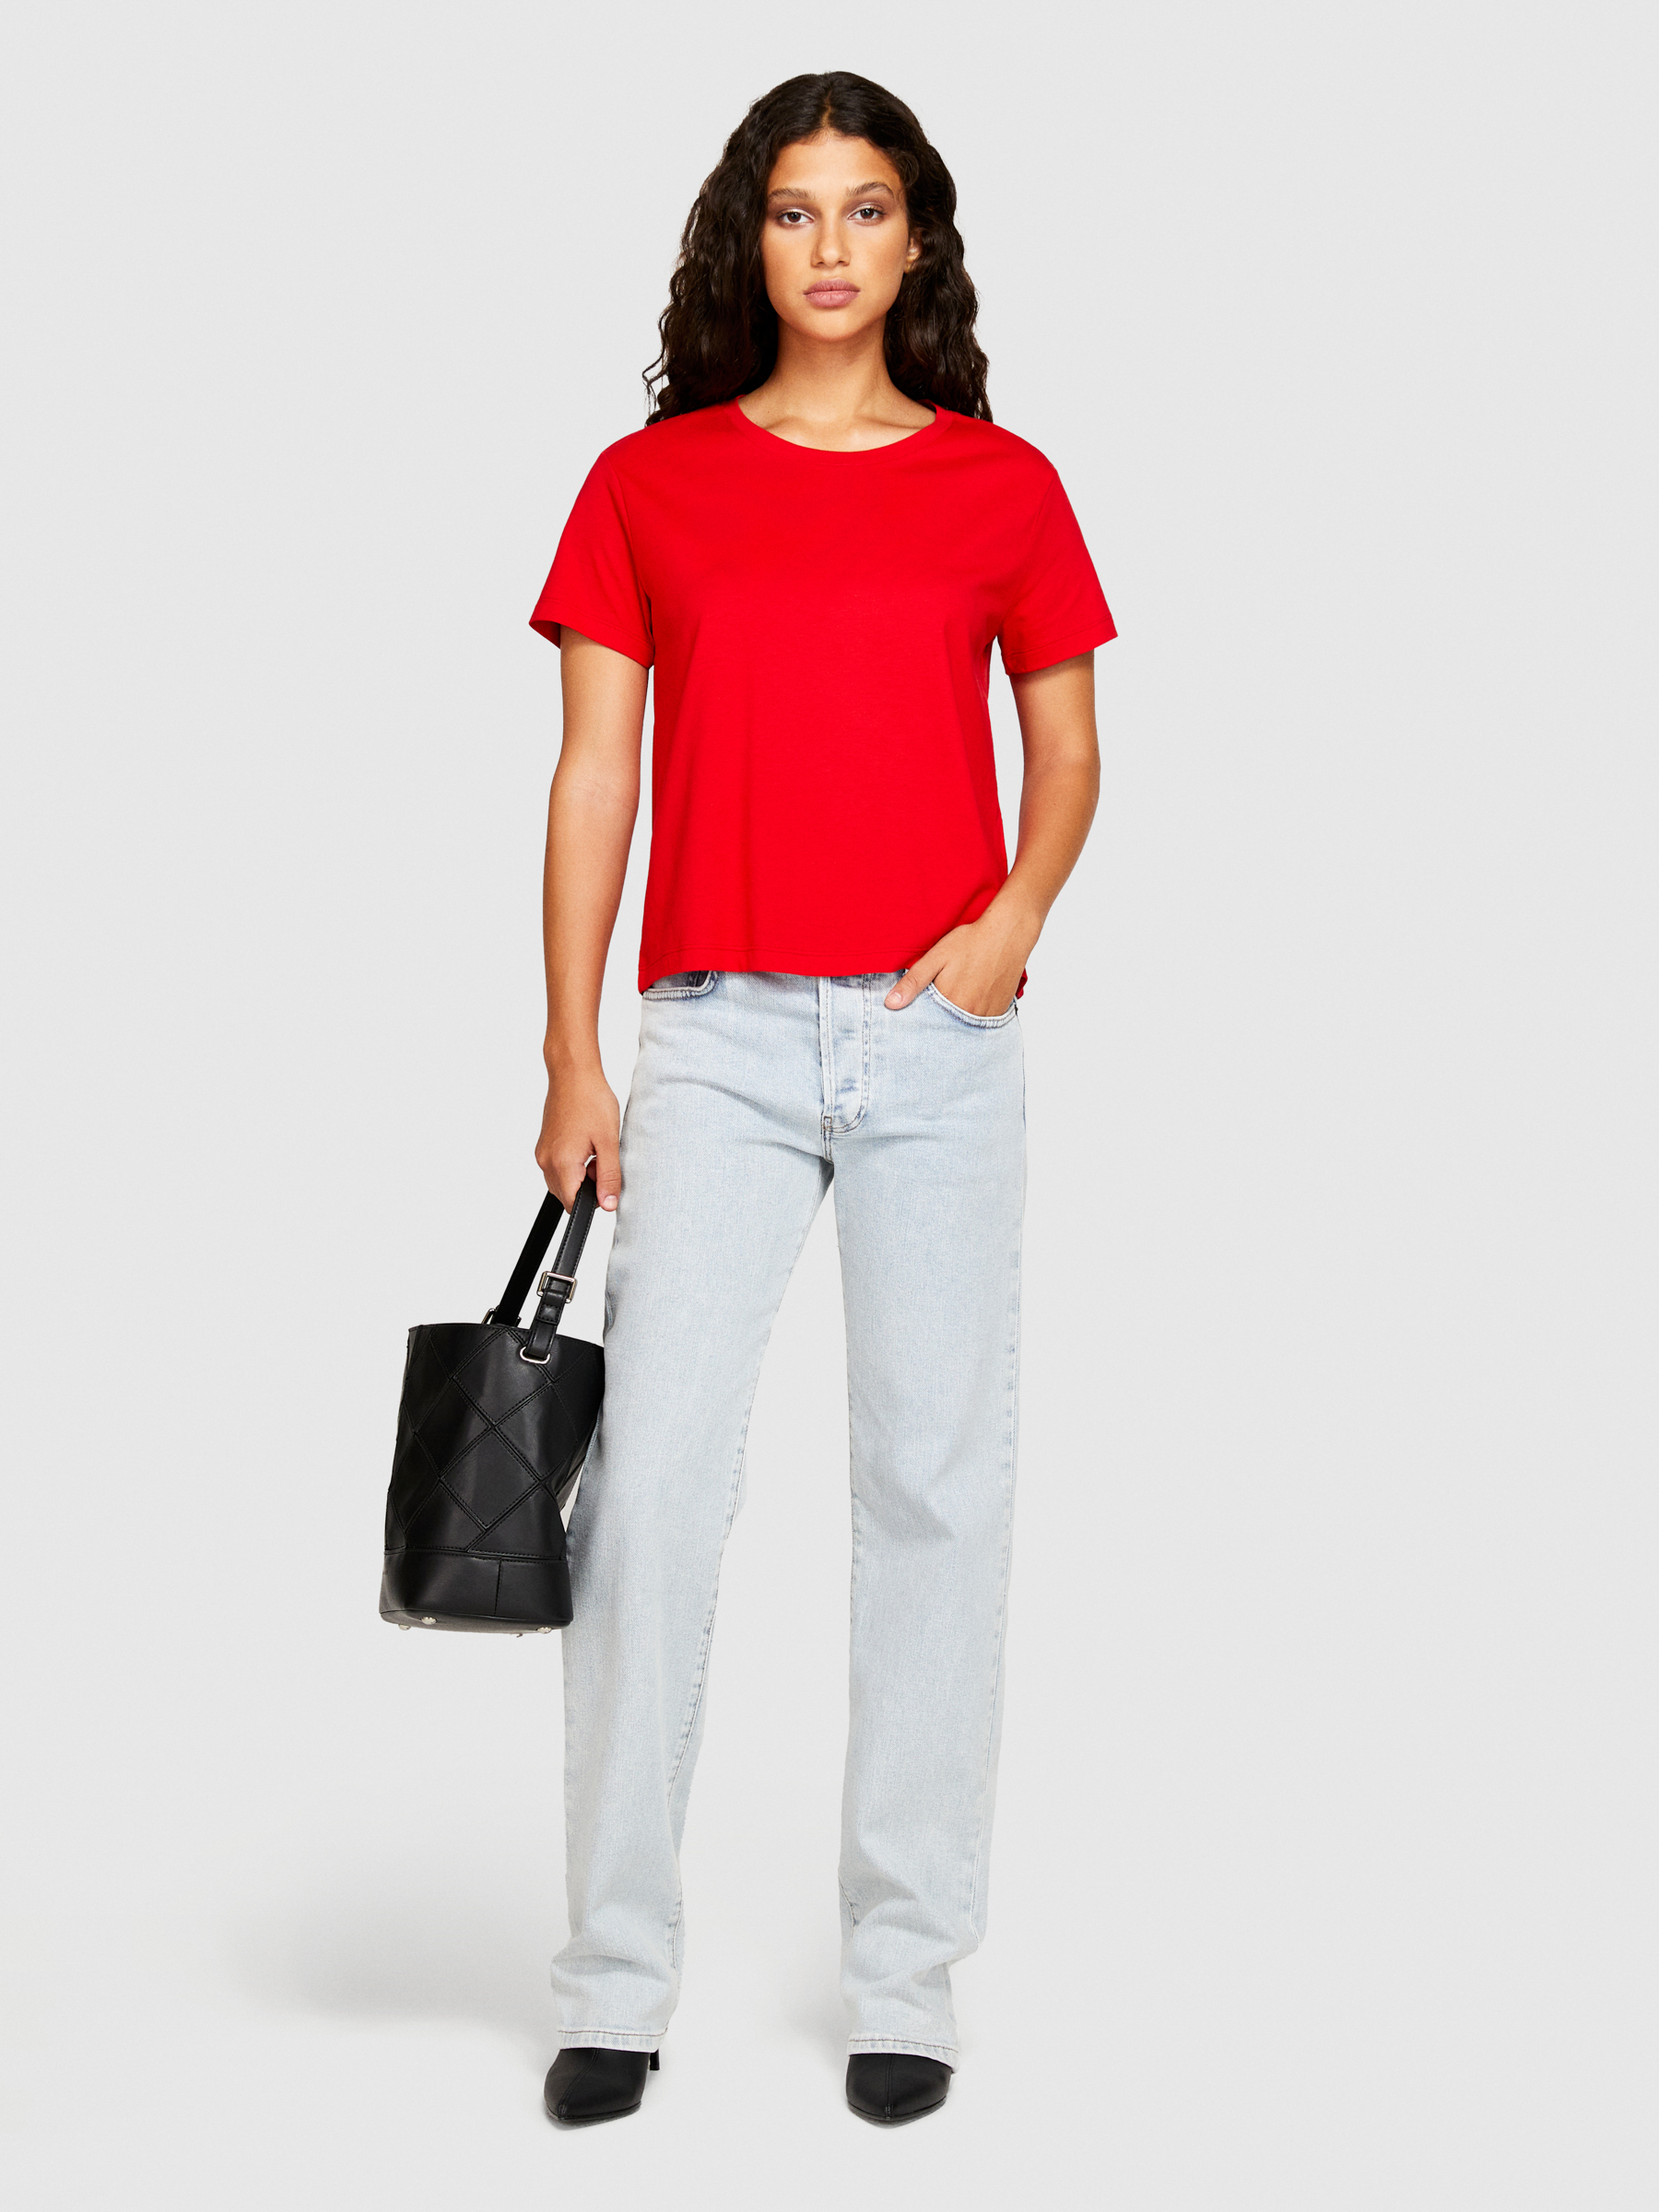 Sisley - Solid Color Boxy Fit T-shirt, Woman, Red, Size: S